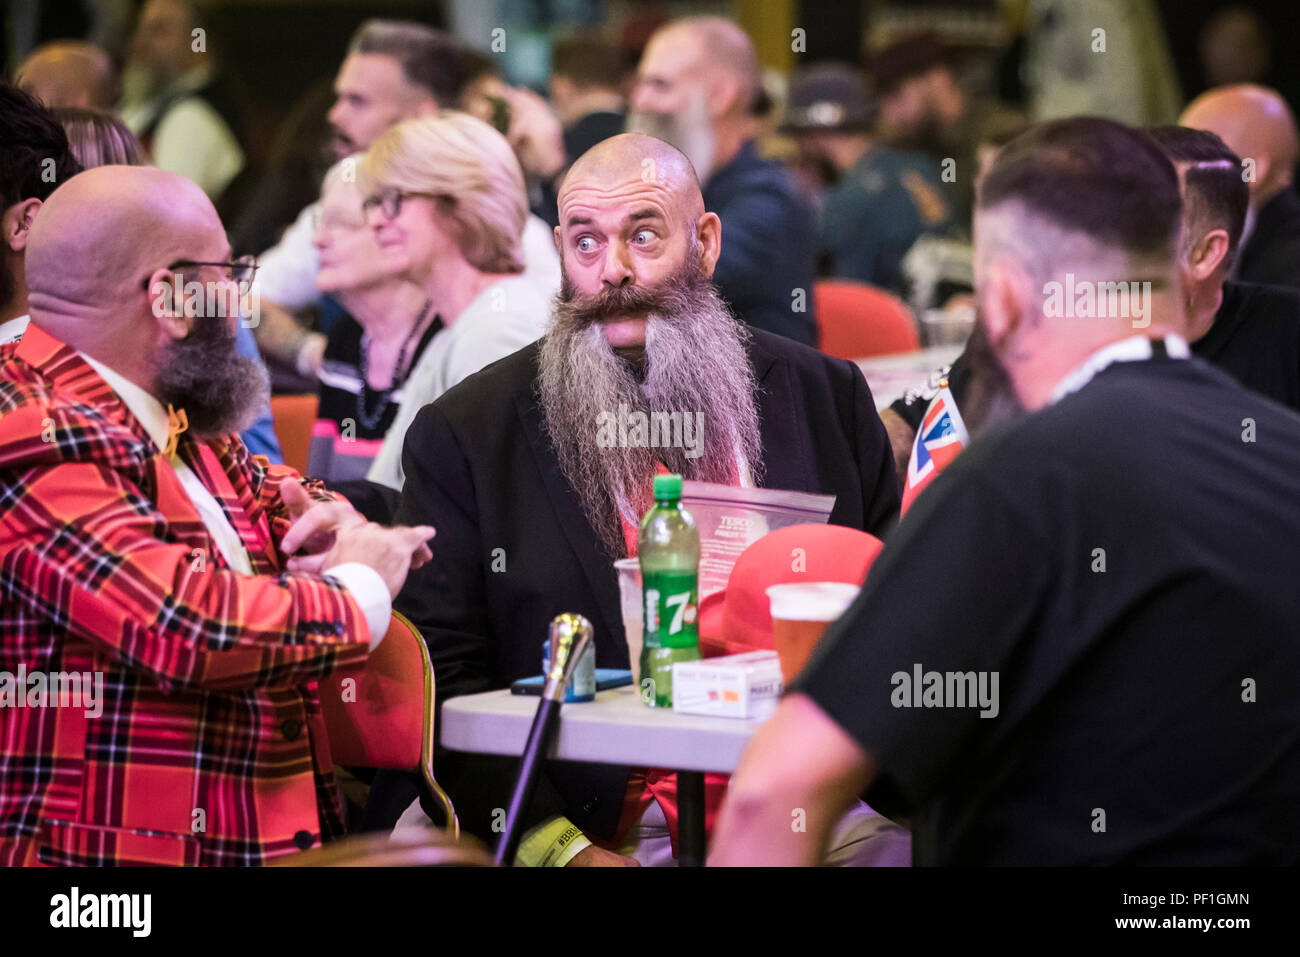 People attend the fourth British Beard and Moustache Championships at the Empress Ballroom, Winter Gardens, Blackpool. Stock Photo